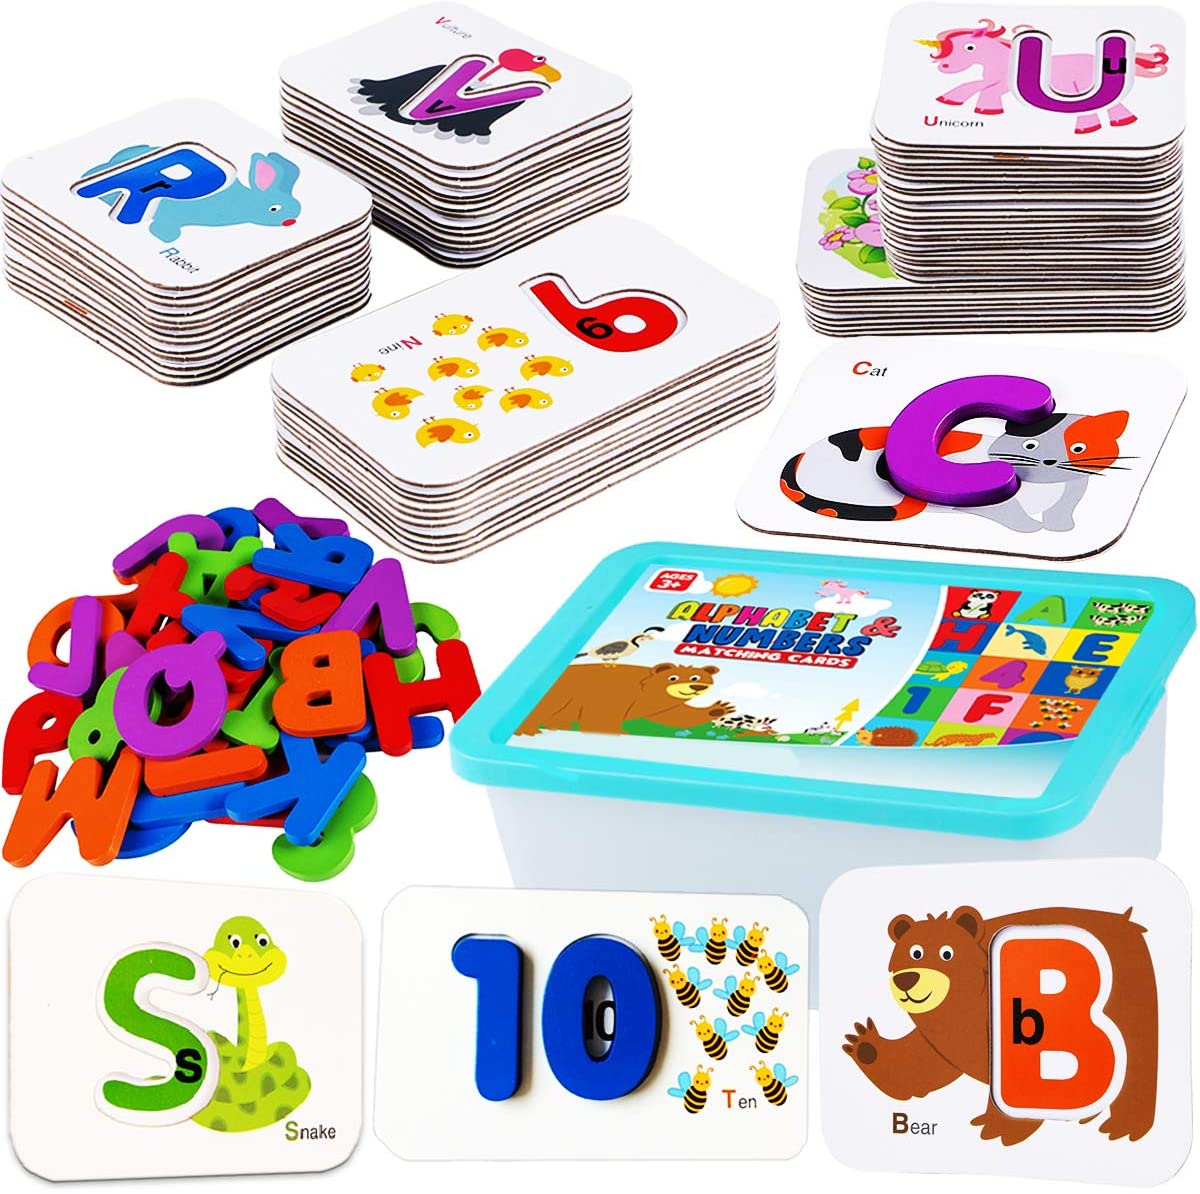 Toddler Montessori Educational Learning Blocks Board Toys for Boys and Girls. Toddler Puzzles，4 Pack Oversized ABC Alphabet Number Puzzles for Kids Ages 1 2 3 4 5 6 Years Old 